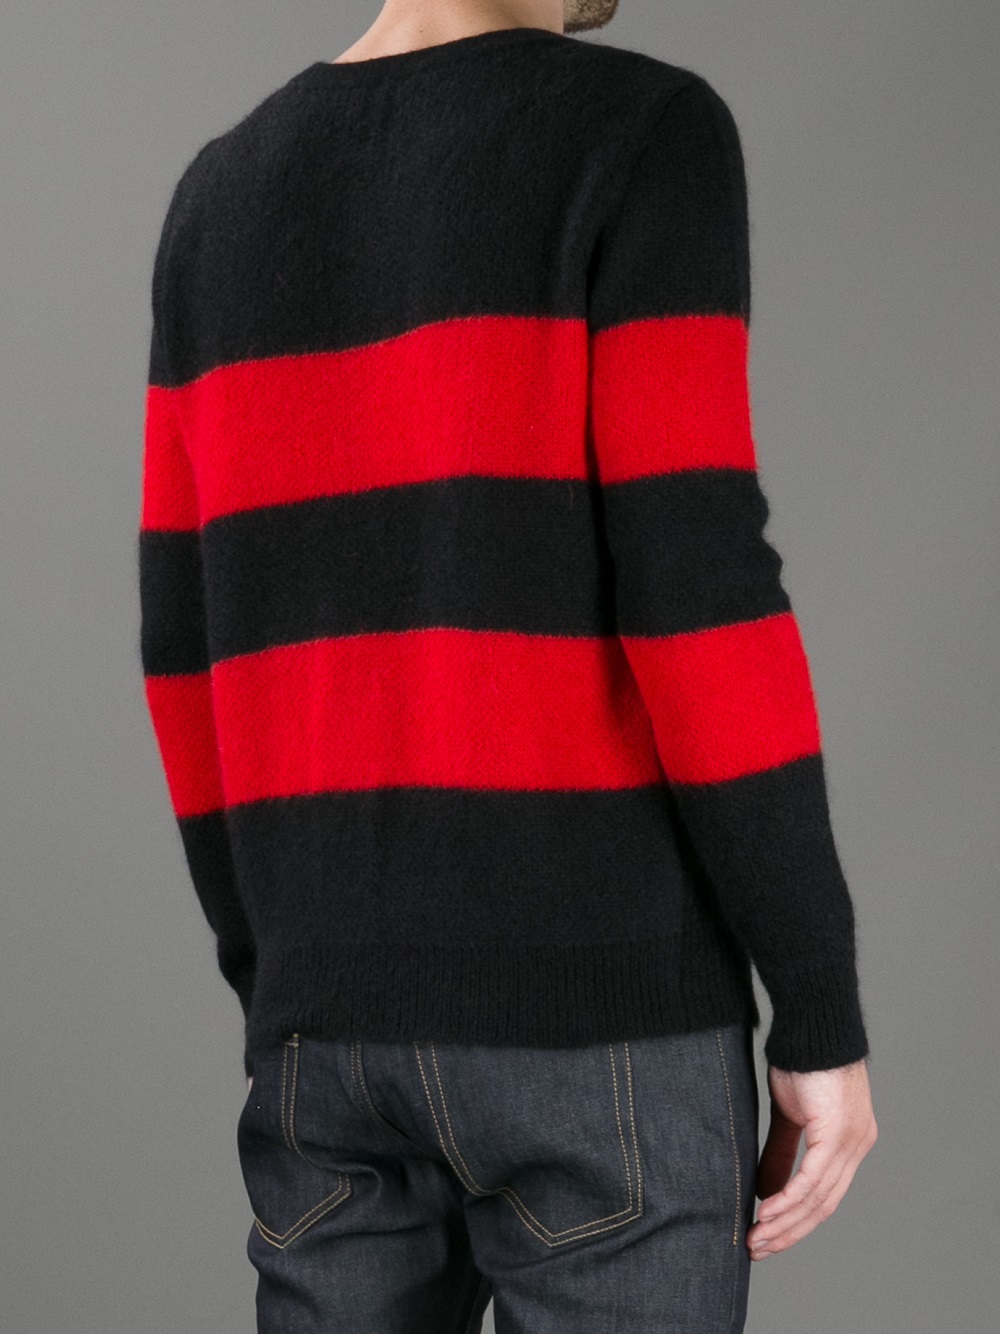 Lyst - Saint Laurent Striped Sweater in Red for Men